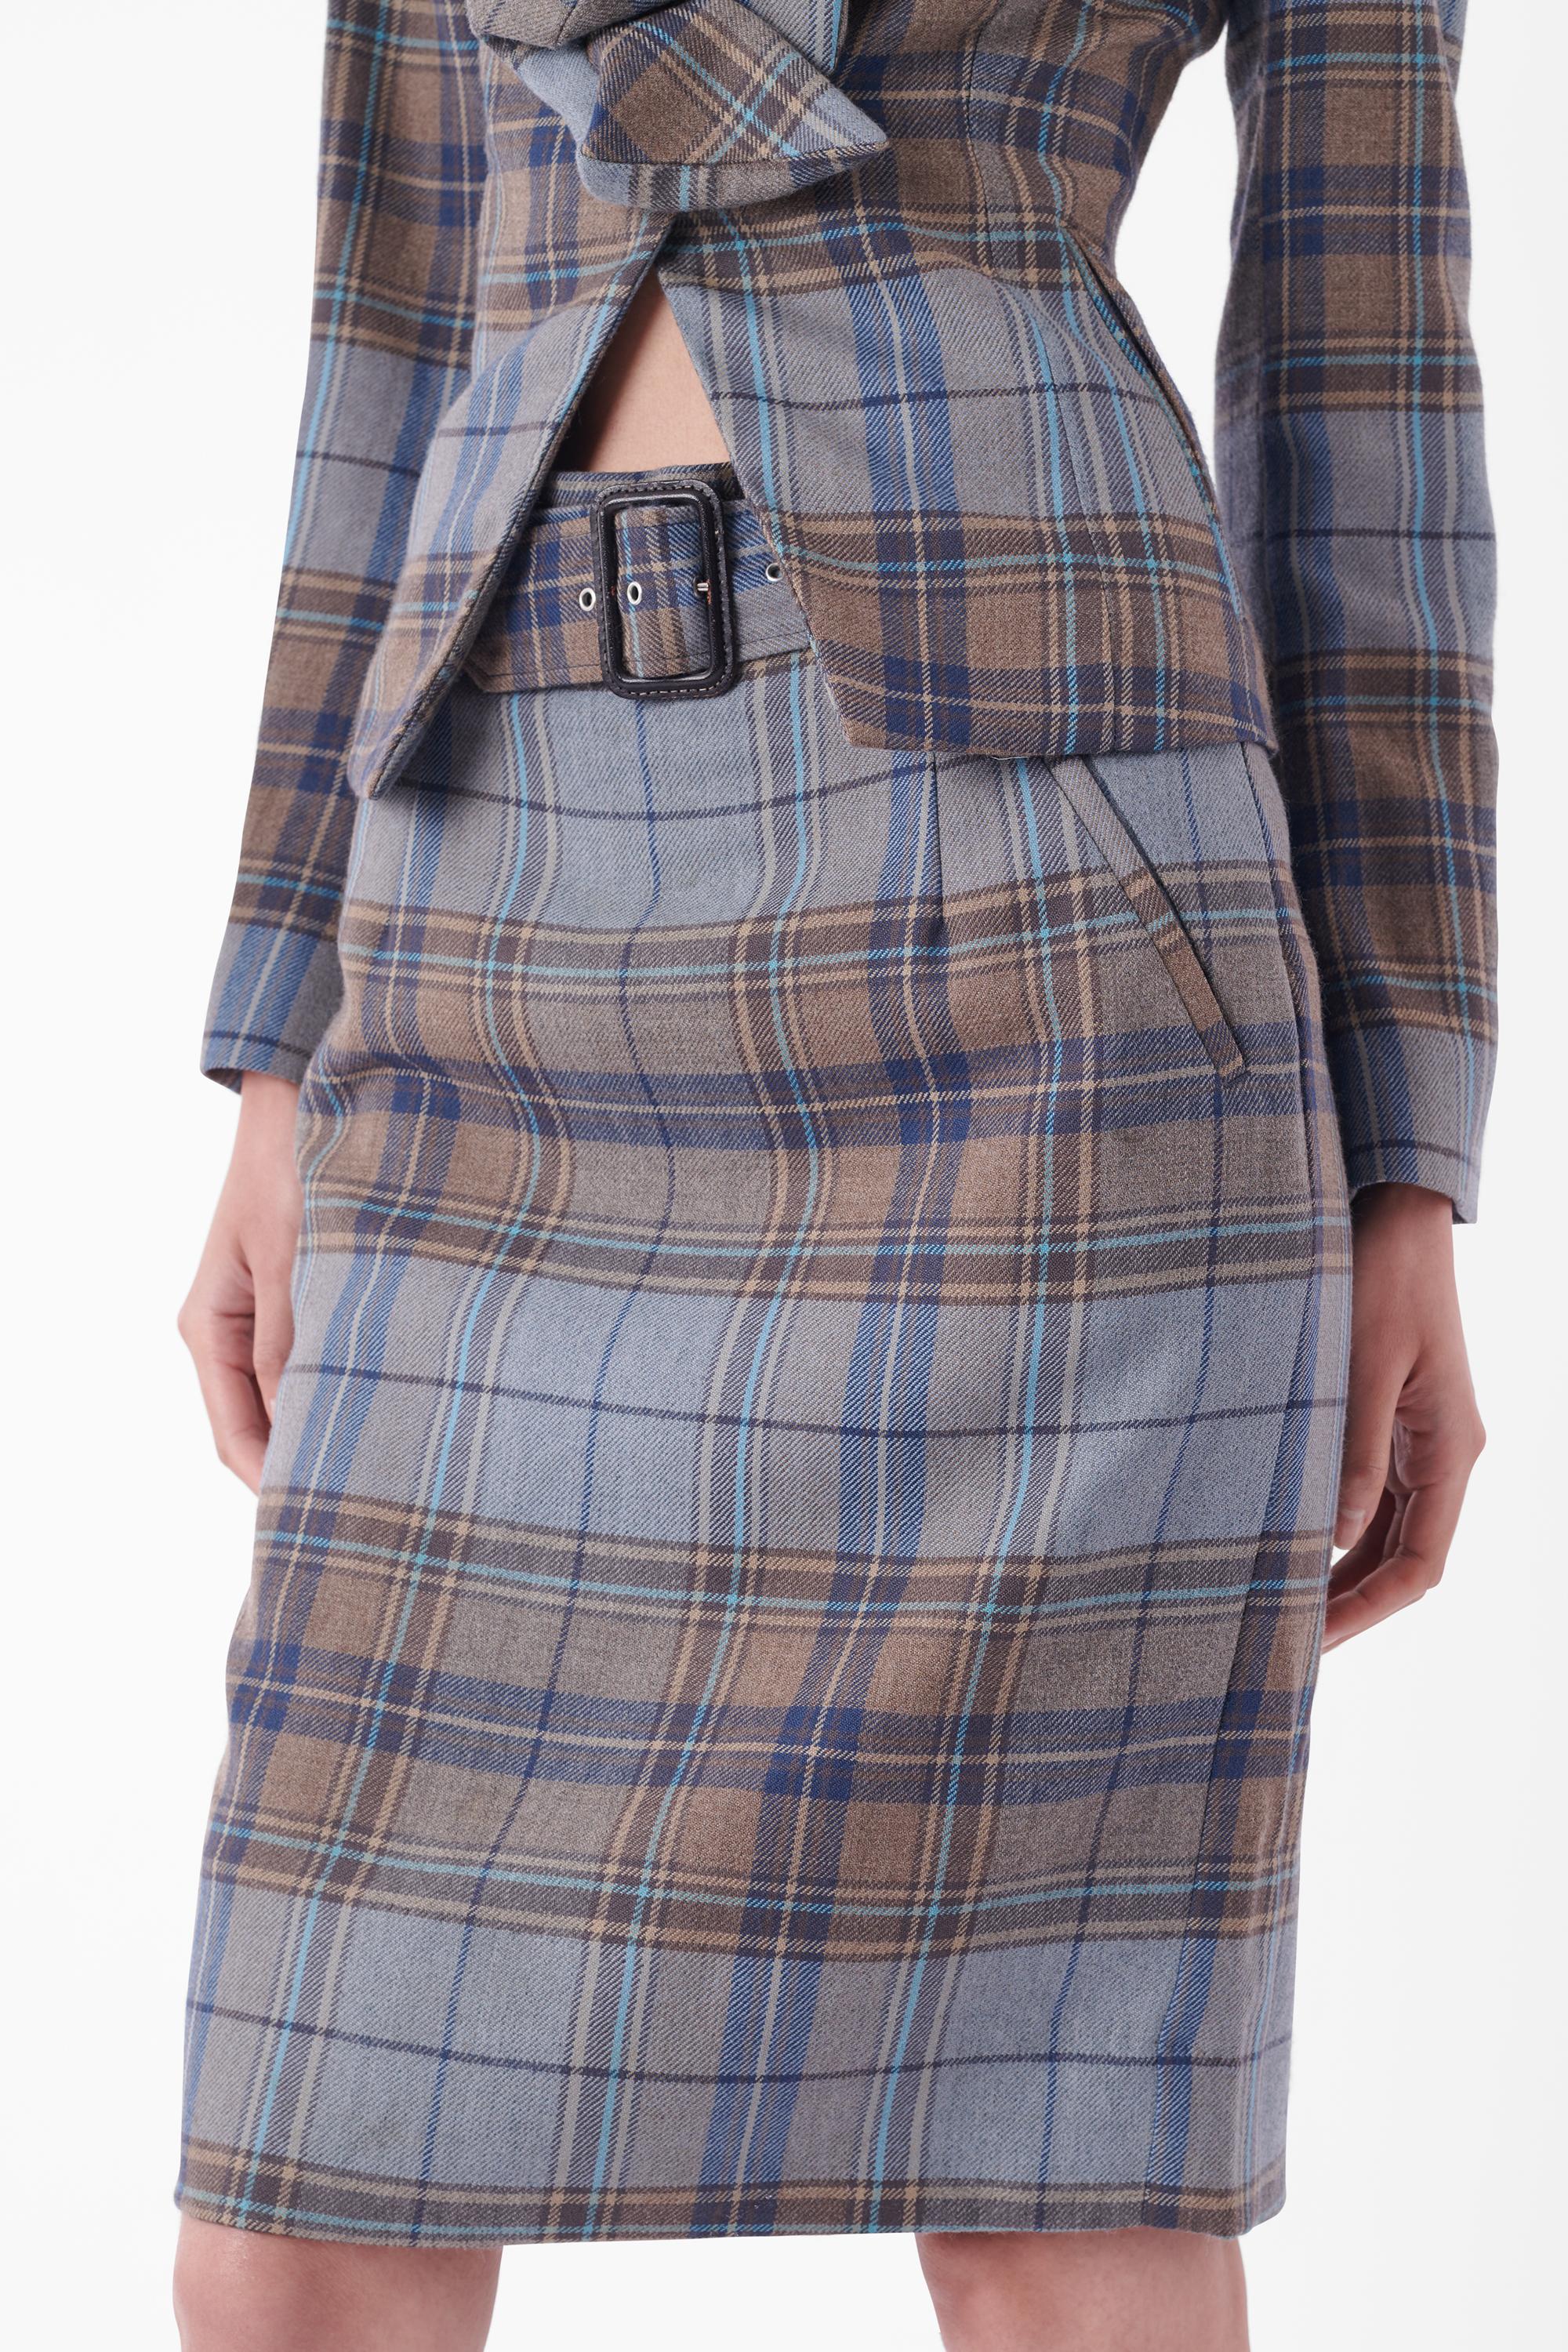 Vivienne Westwood  F/W 2012 Runway Blue Tartan Two Piece Co-ord In Excellent Condition For Sale In London, GB